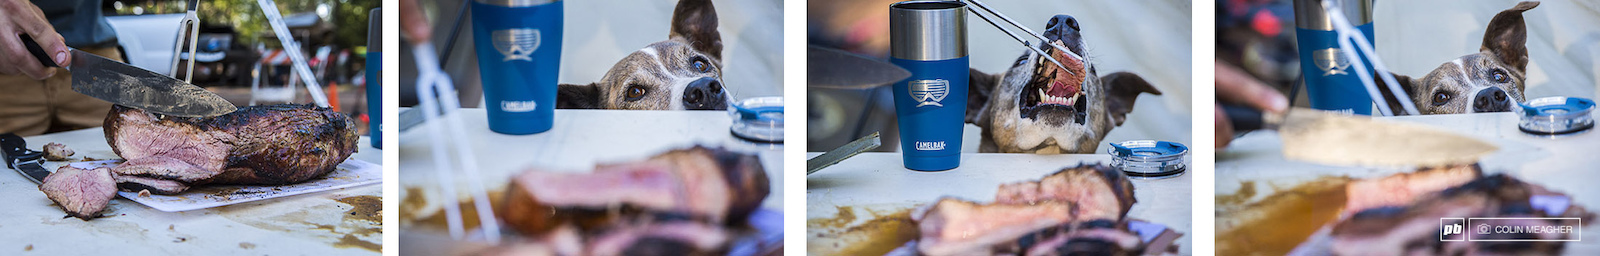 Seth from Camelbak makes a mean Tri Tip roast... Want it. Want it. YES! Want more...